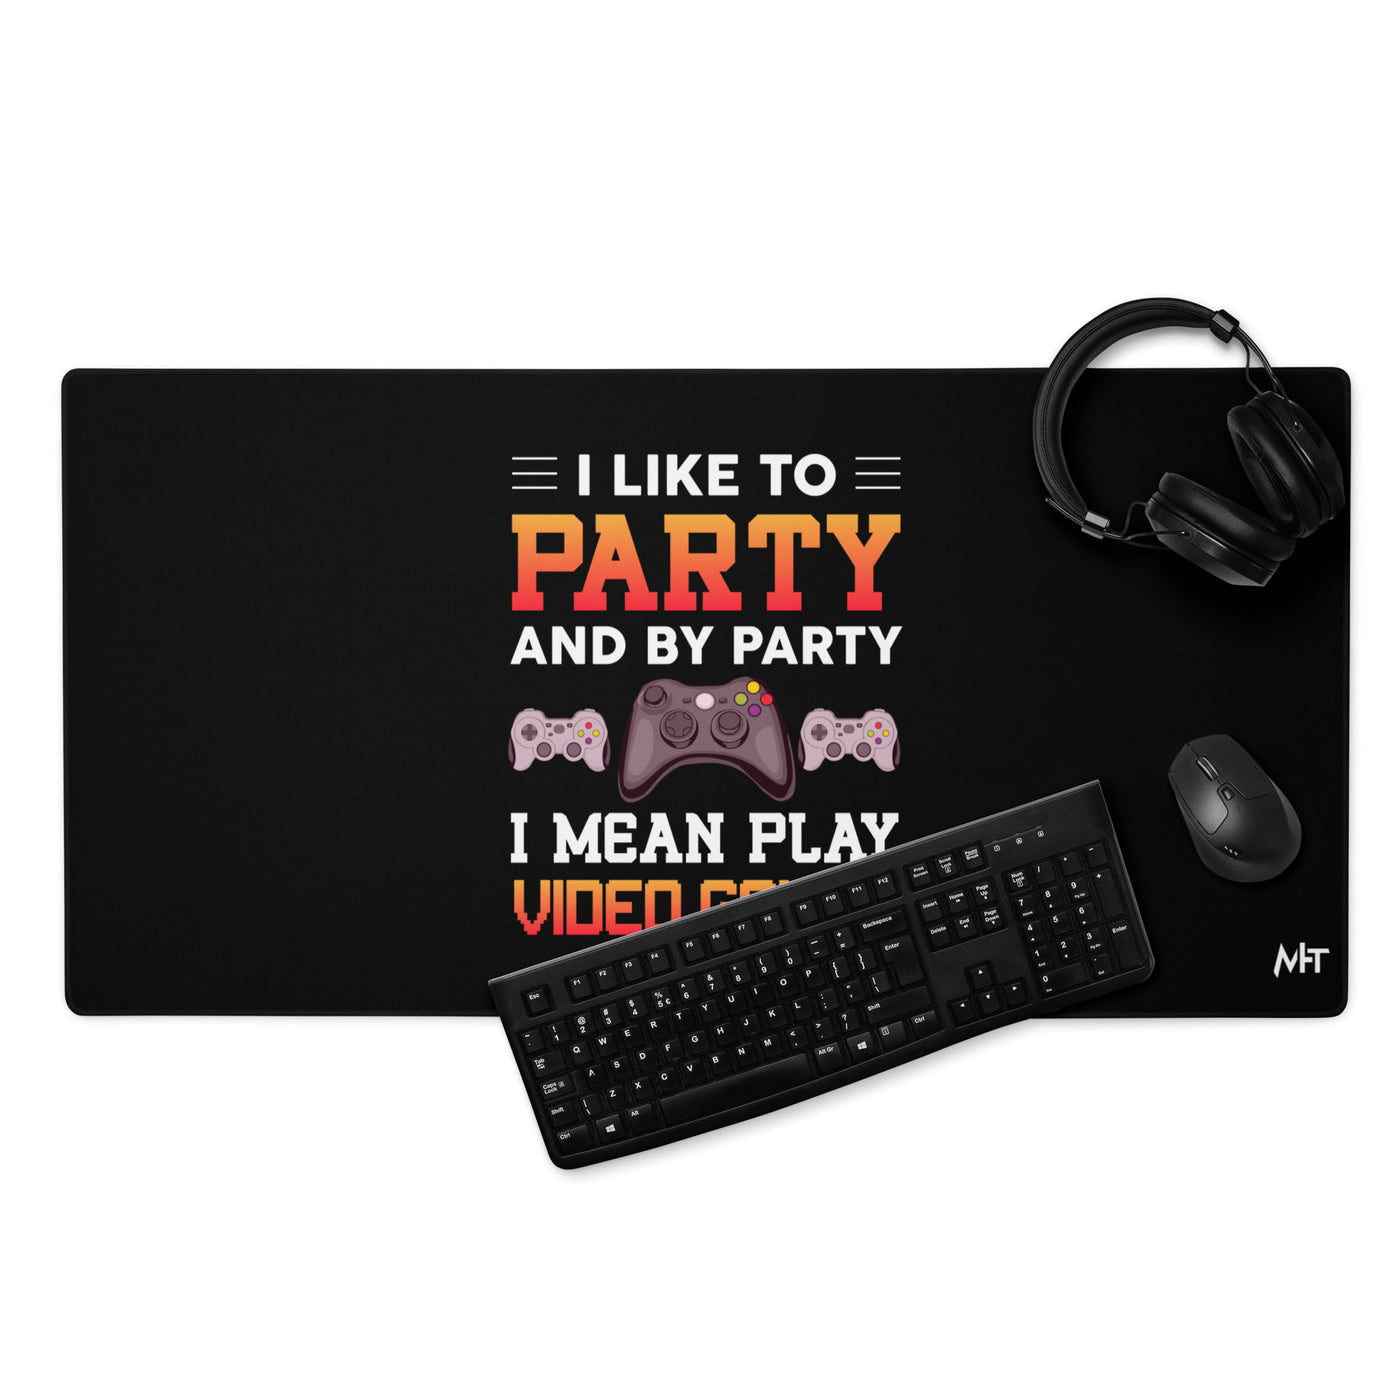 I Like to Party and by Party, I mean Play Video Games - Desk Mat